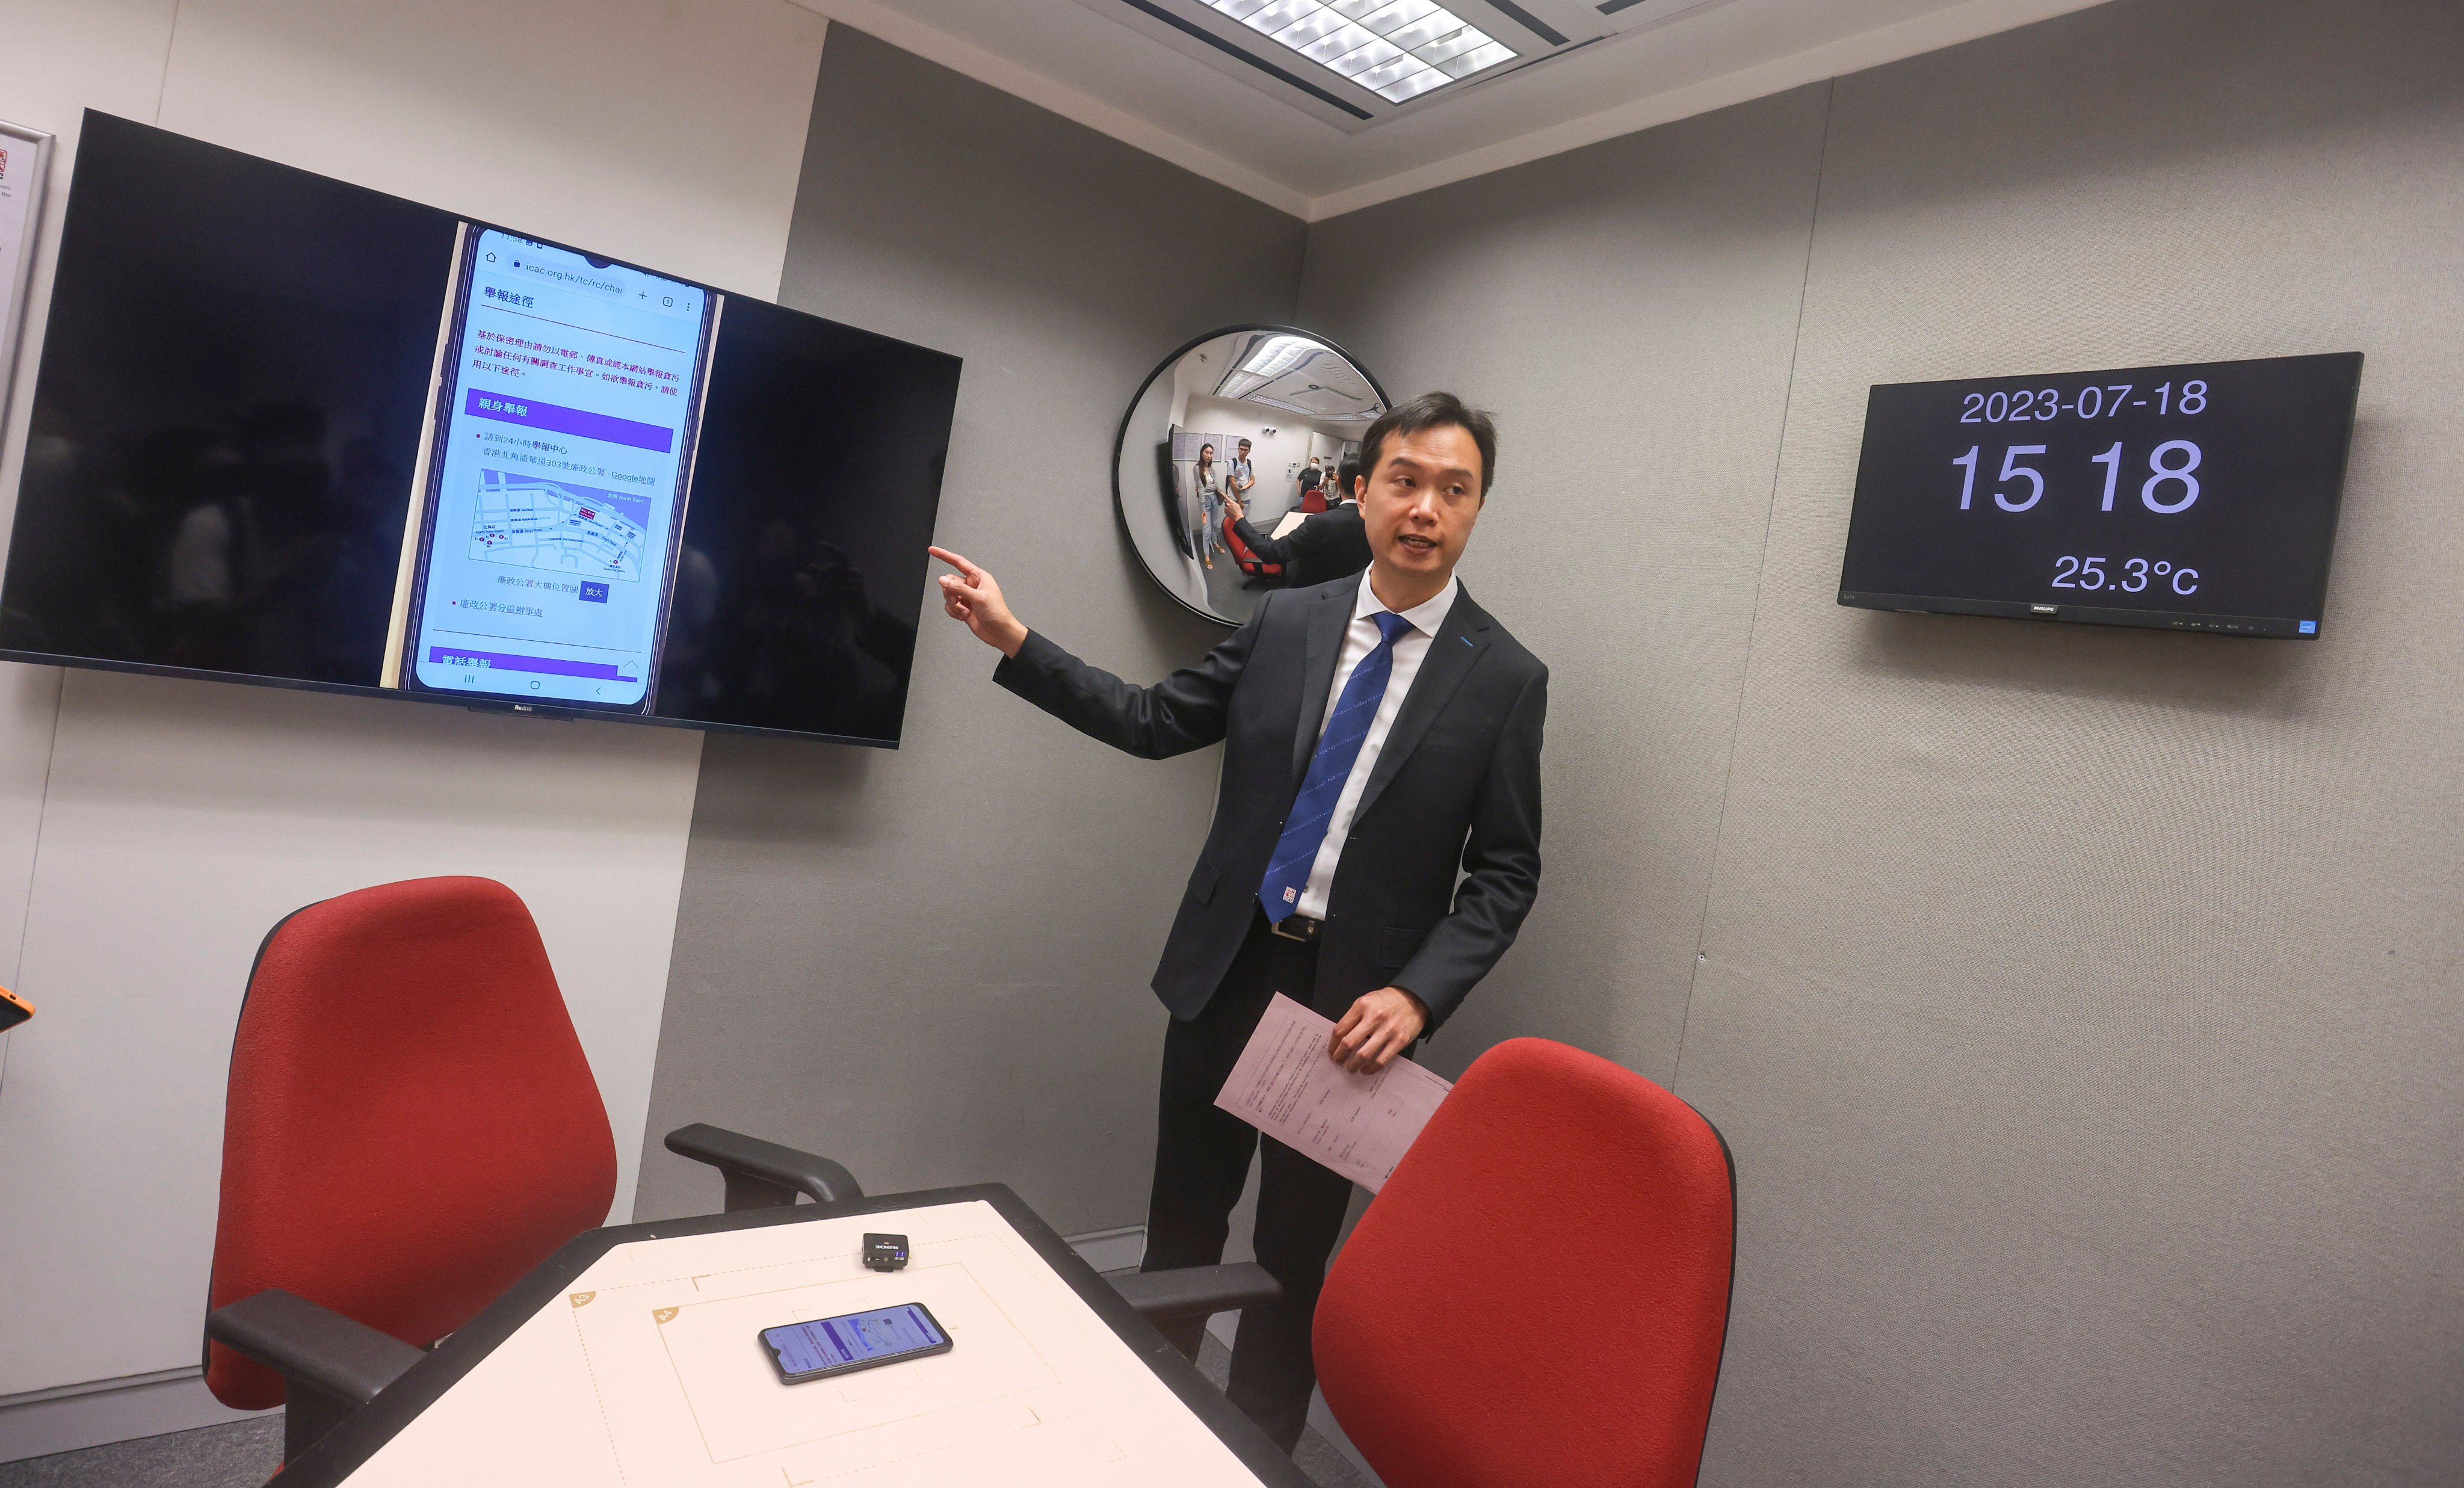 An ICAC official displays new-generation interview rooms, part of technologies covered in its UN workshops. Photo: Jonathan Wong